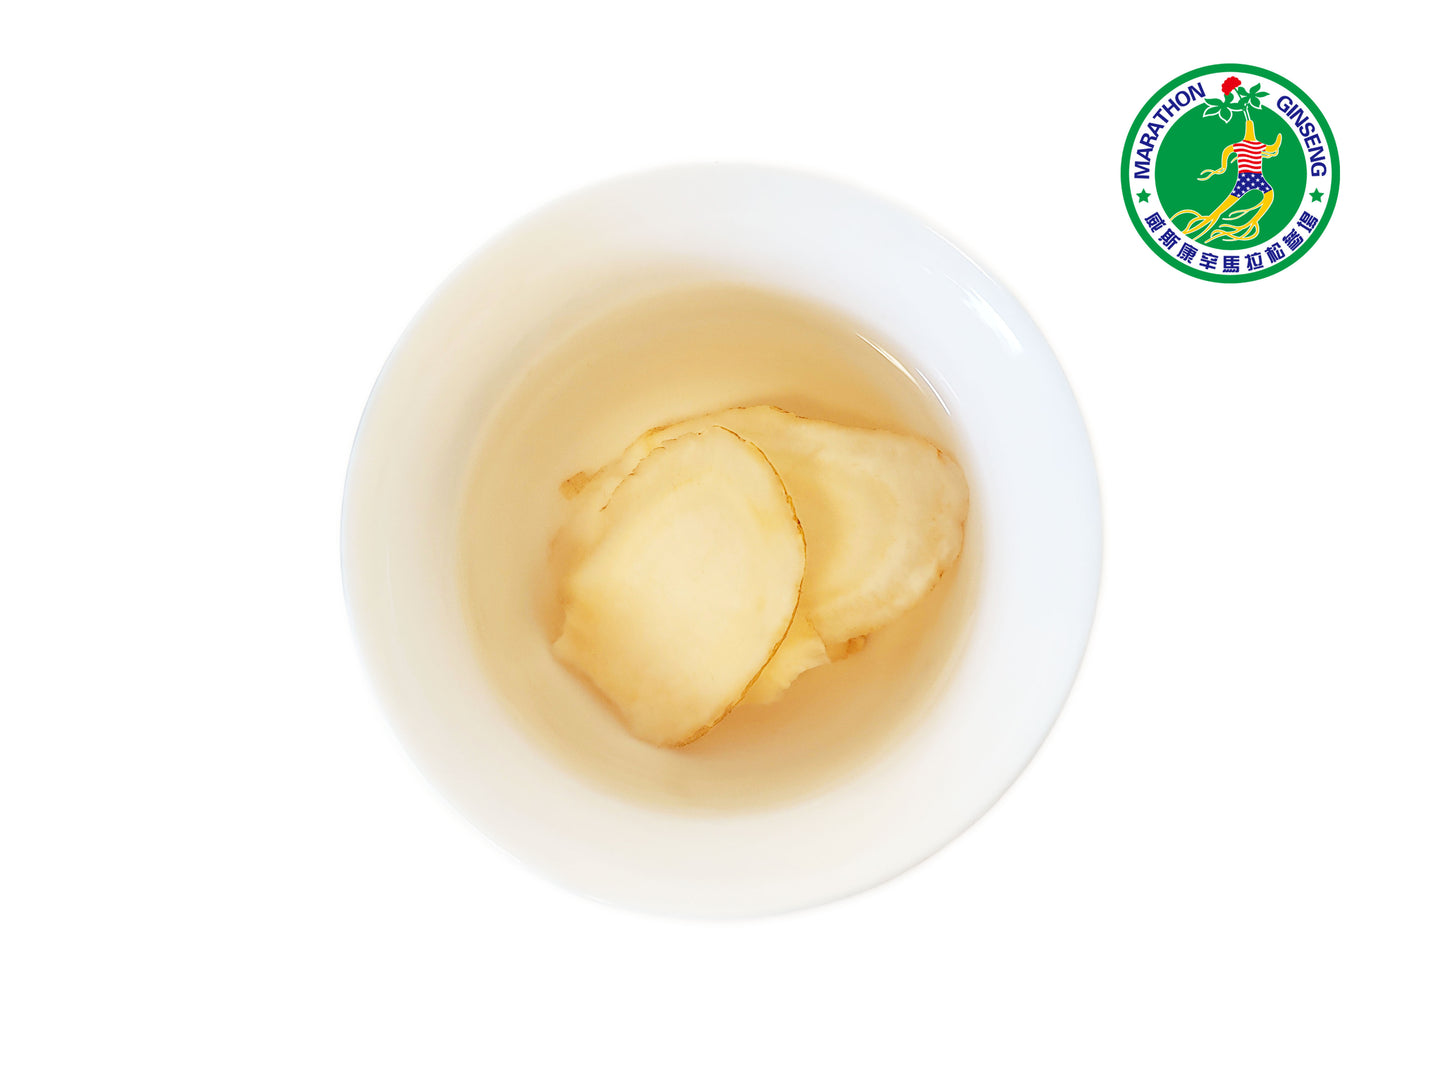 621 - 5 Yr Cultivated Ginseng Jumbo Slices   - 75g